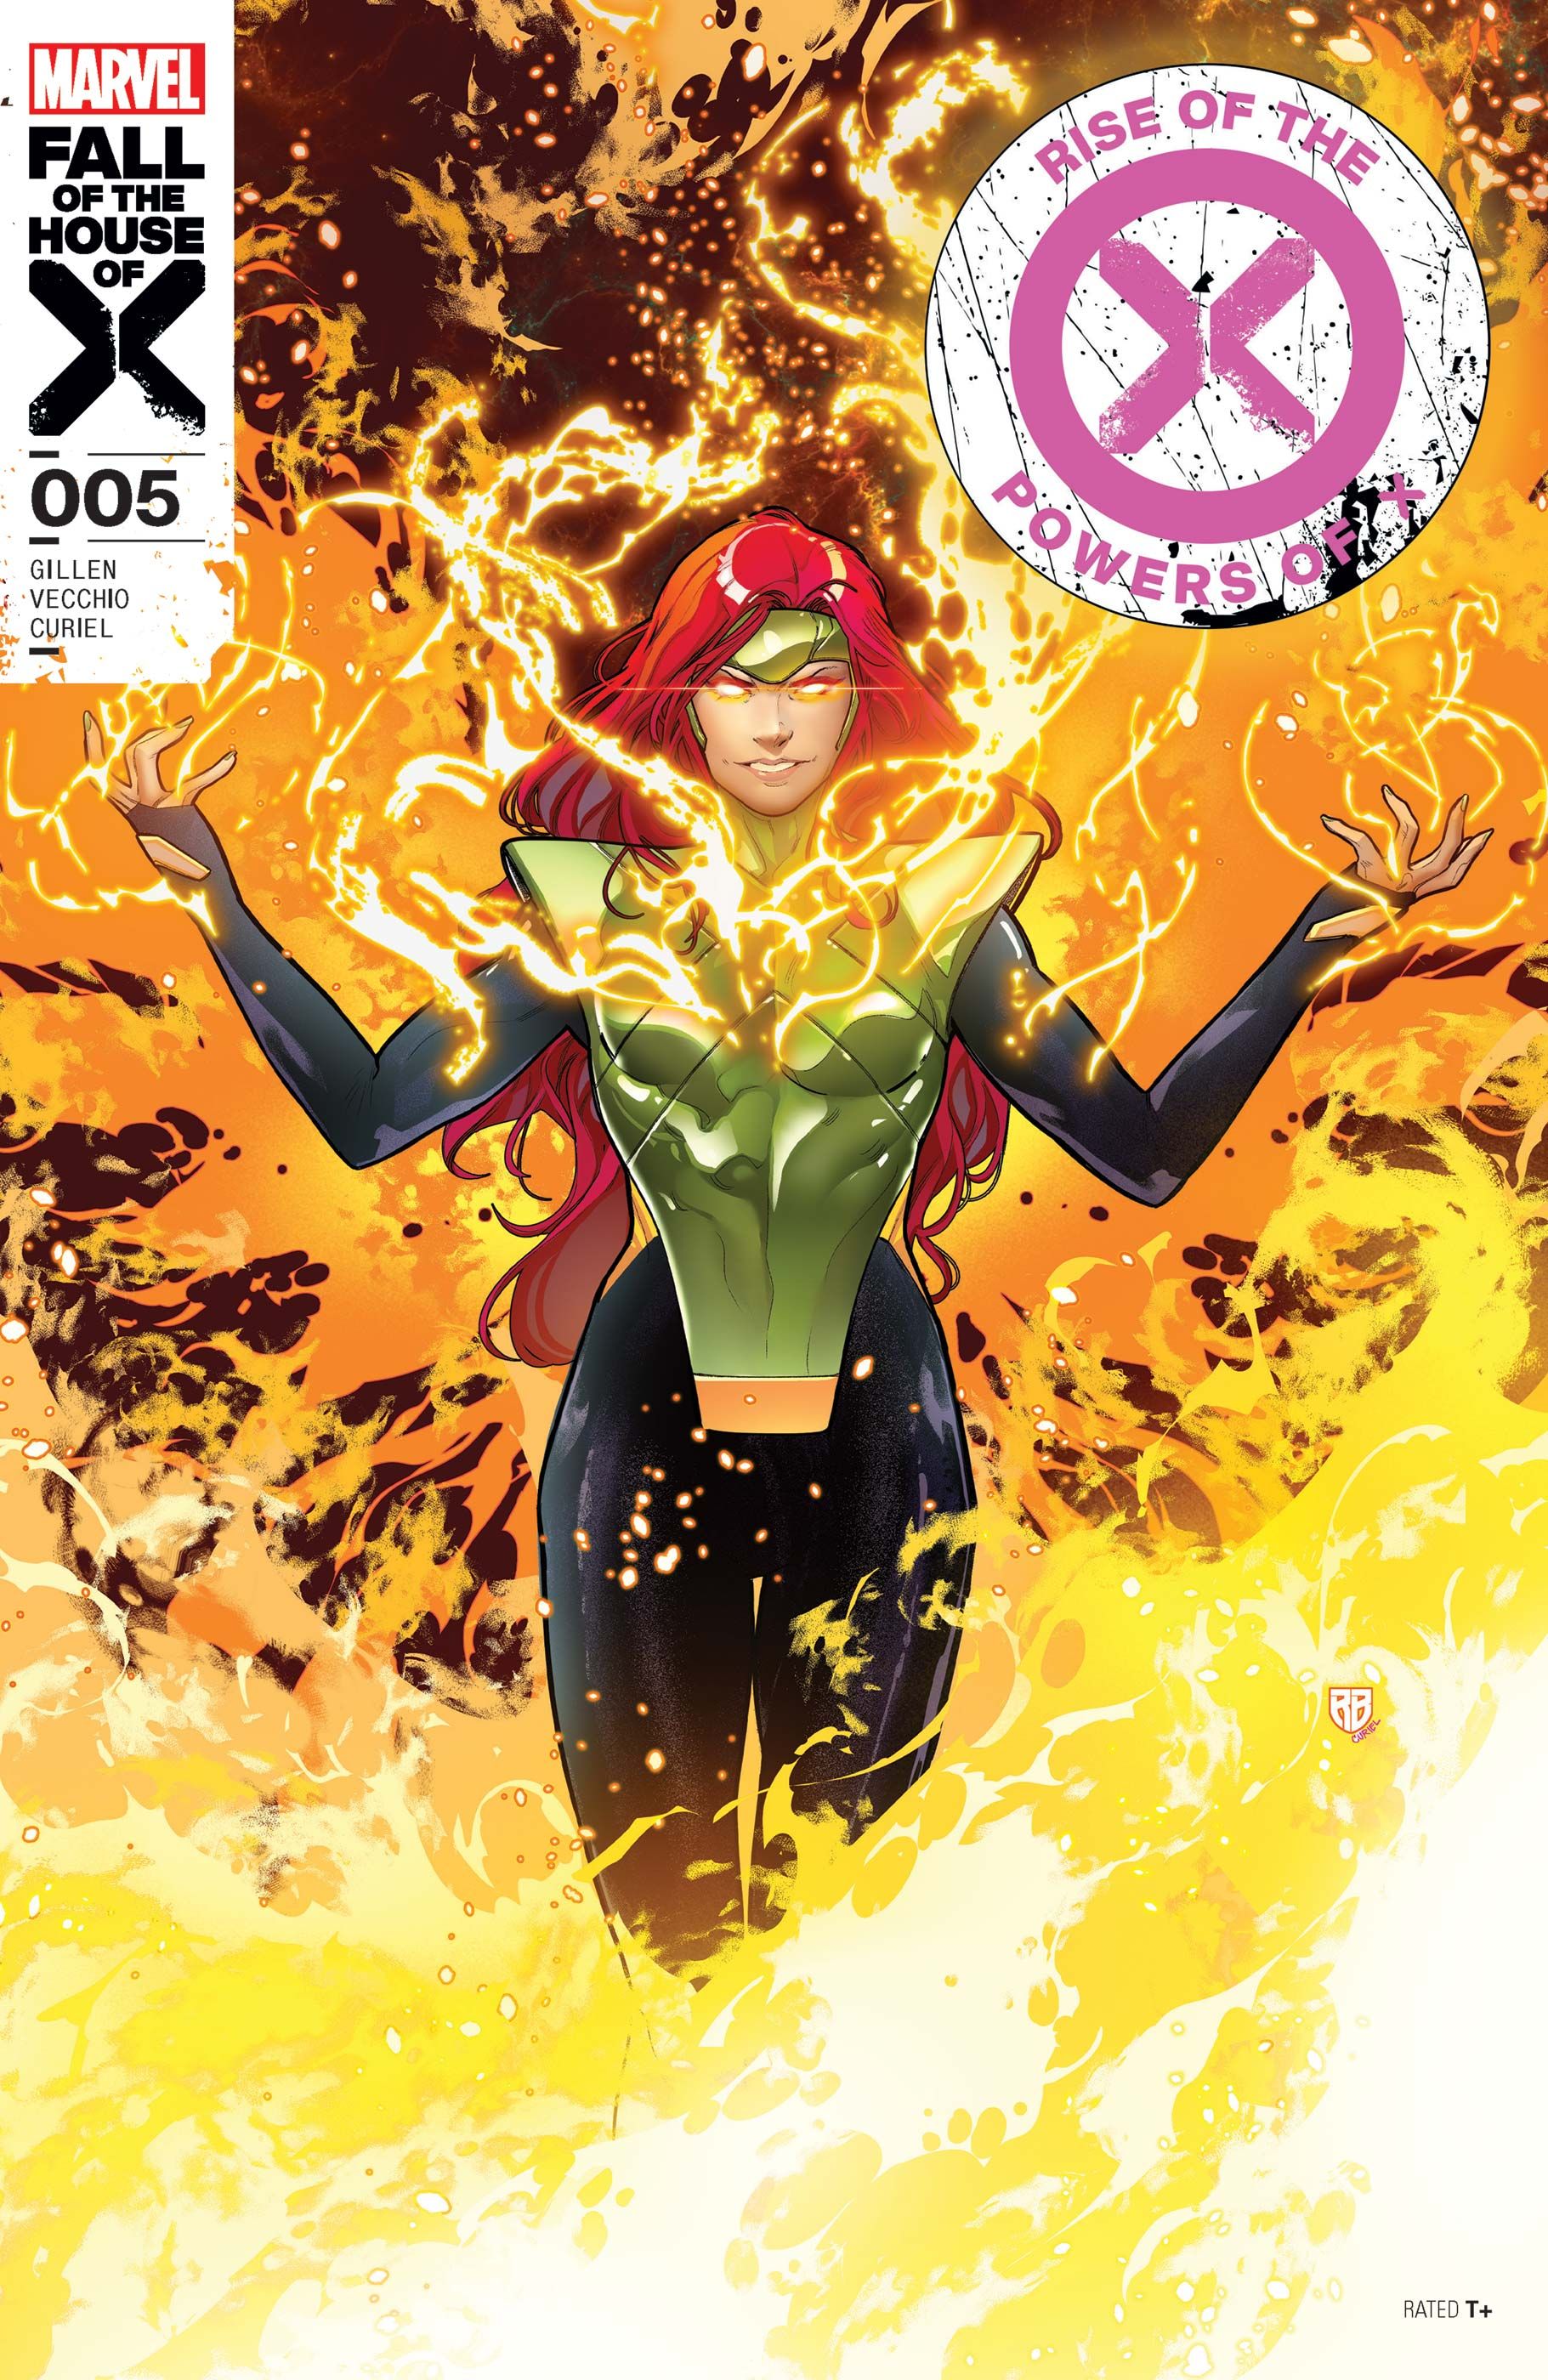 Rise of the Powers of X #5 cover